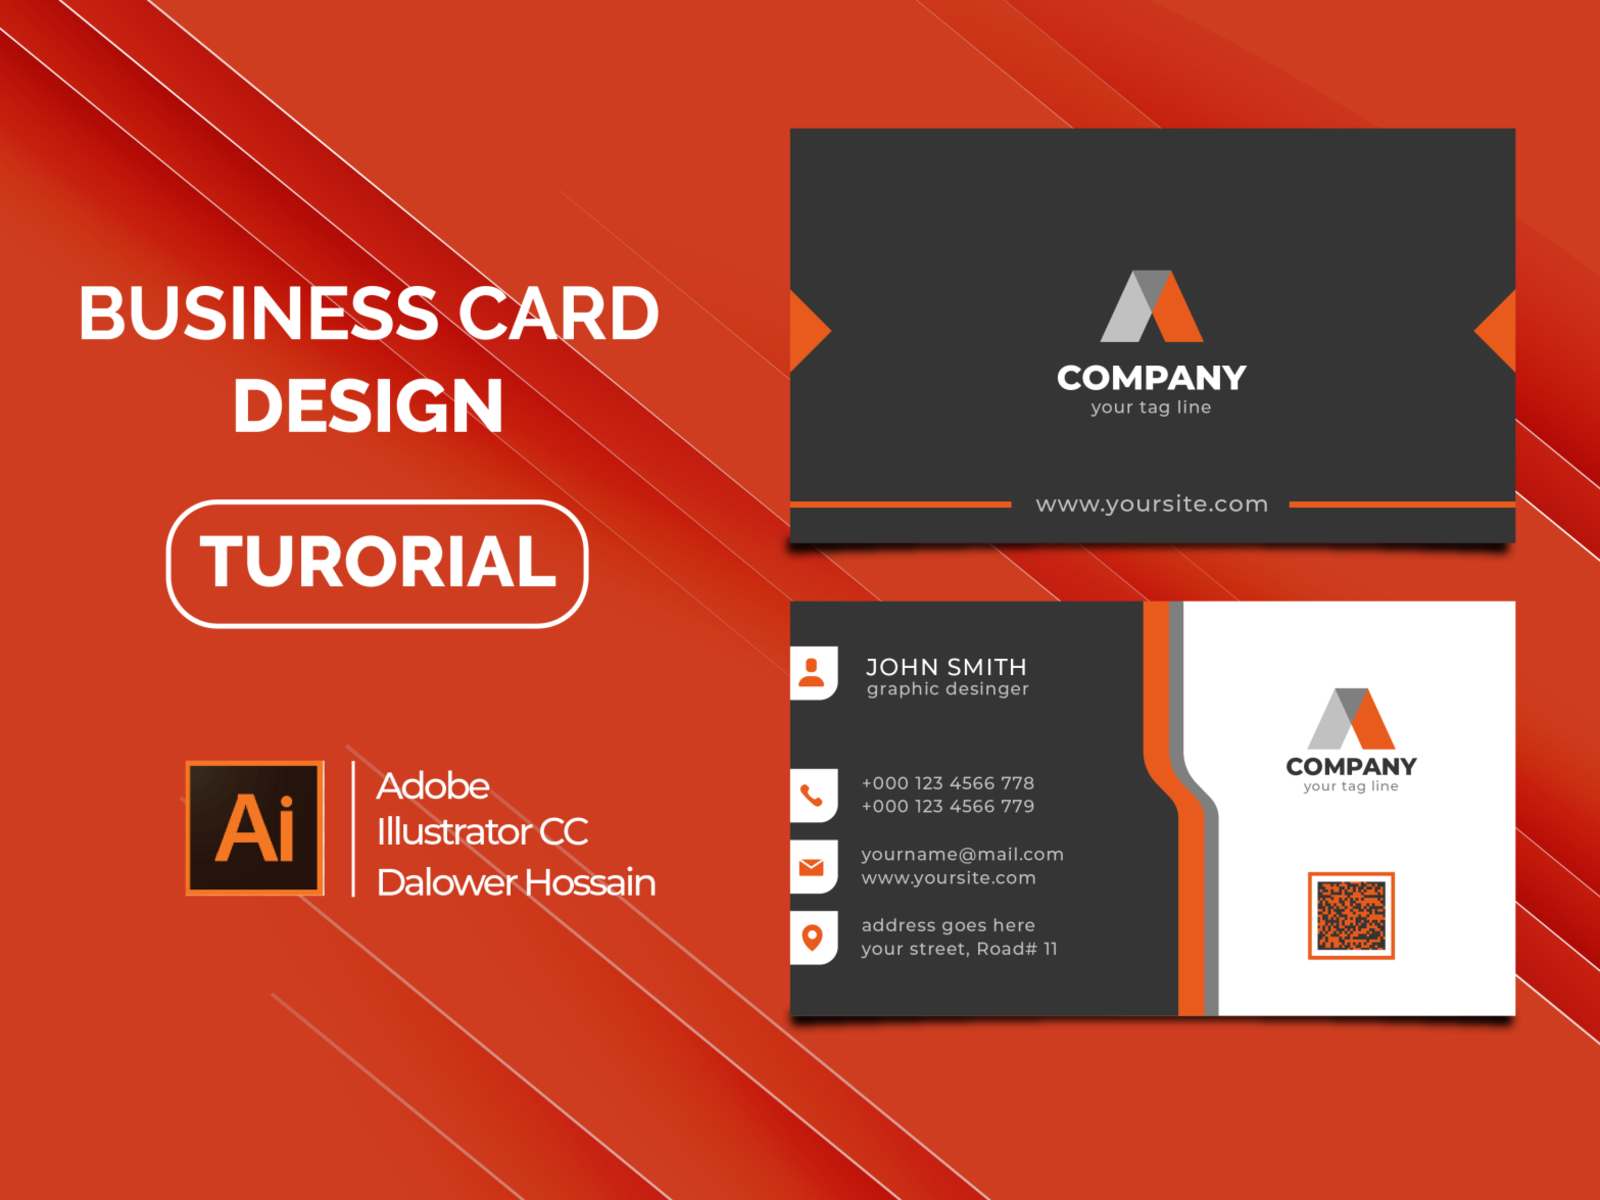 professional-business-card-design-in-adobe-illustrator-cc-by-rockdh-on